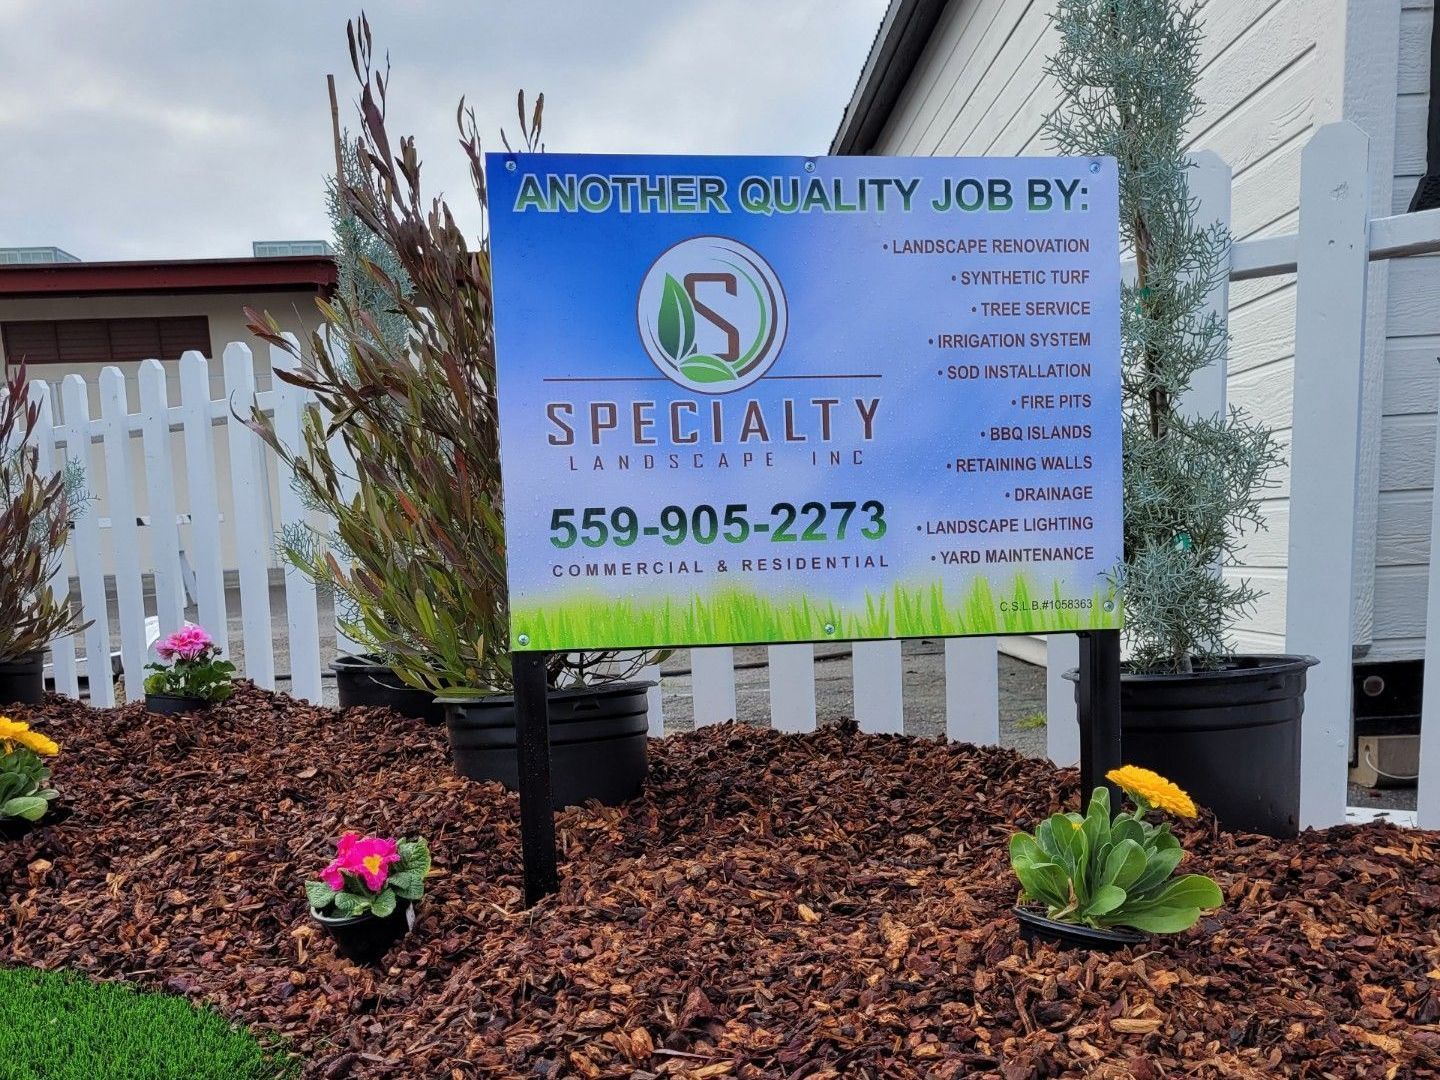 Specialty Landscape Inc.: Enhancing outdoor beauty with expert landscaping services, in Fresno, CA. 